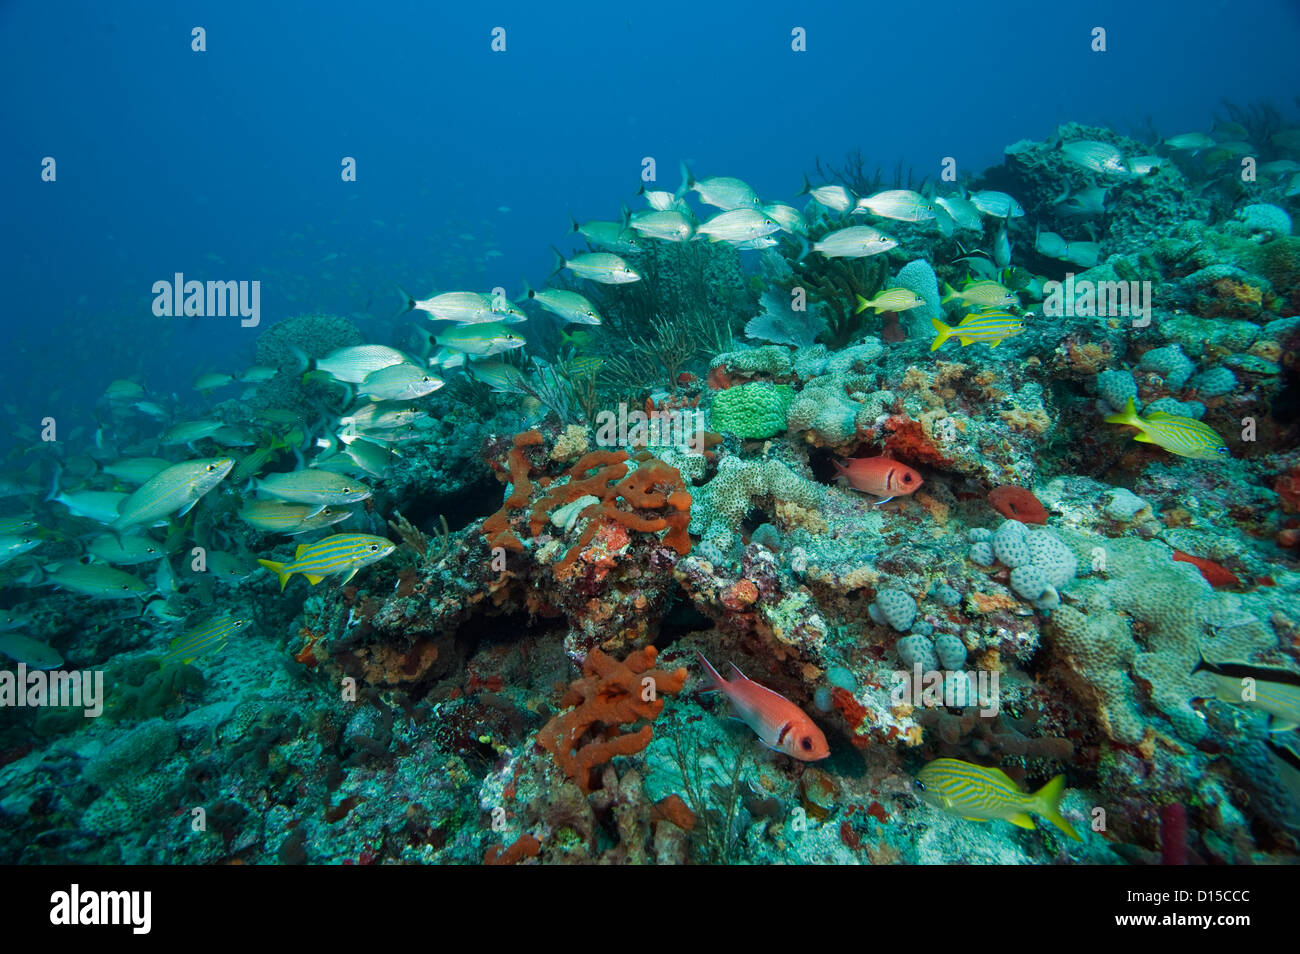 A coral reef in Southeastern Florida, covered in a variety of invertebrate species, including corals and sponges, is home to hun Stock Photo